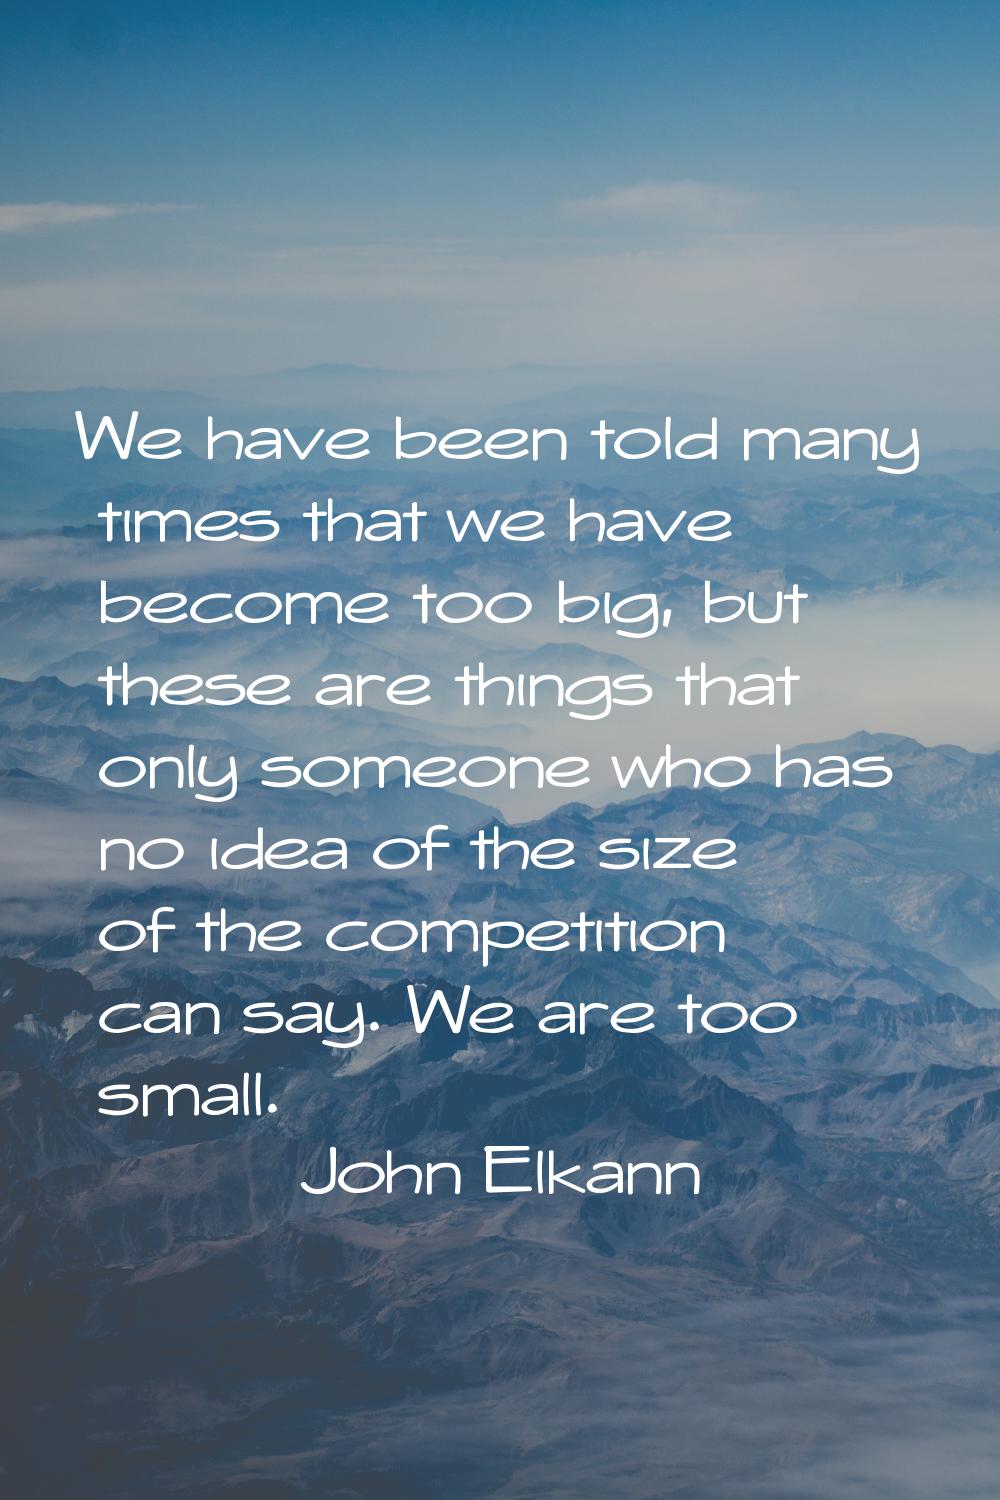 We have been told many times that we have become too big, but these are things that only someone wh